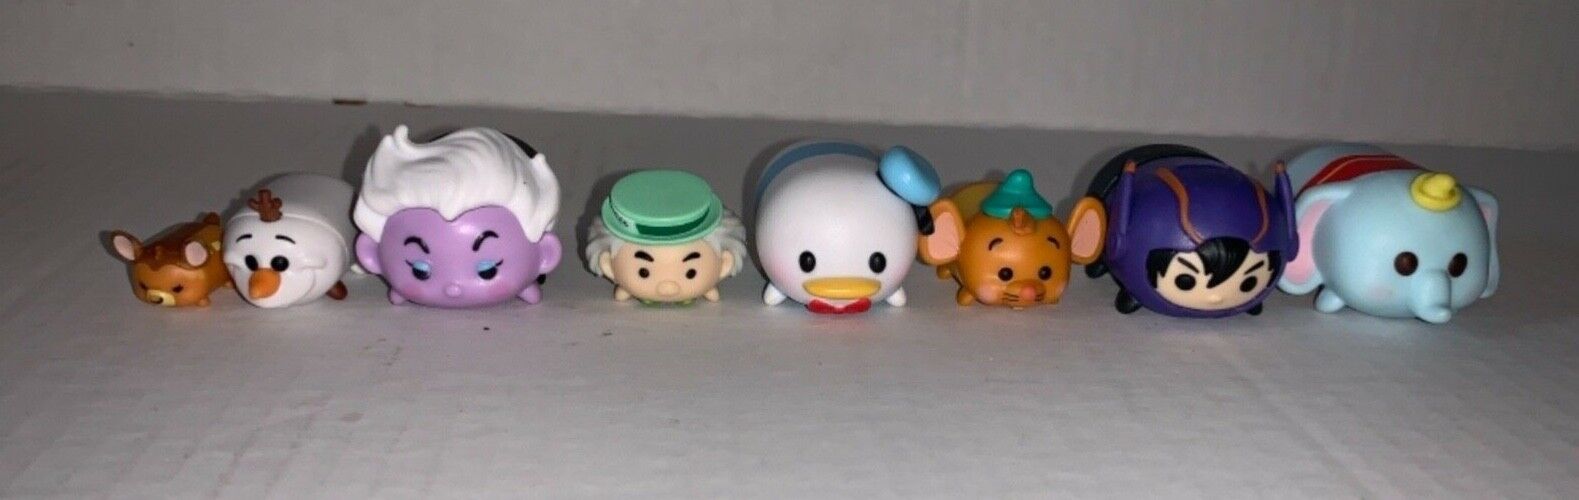 Tsum Tsum Figures Various Sizes Lot Disney 14 figures Mad Hatter Chesire Cat